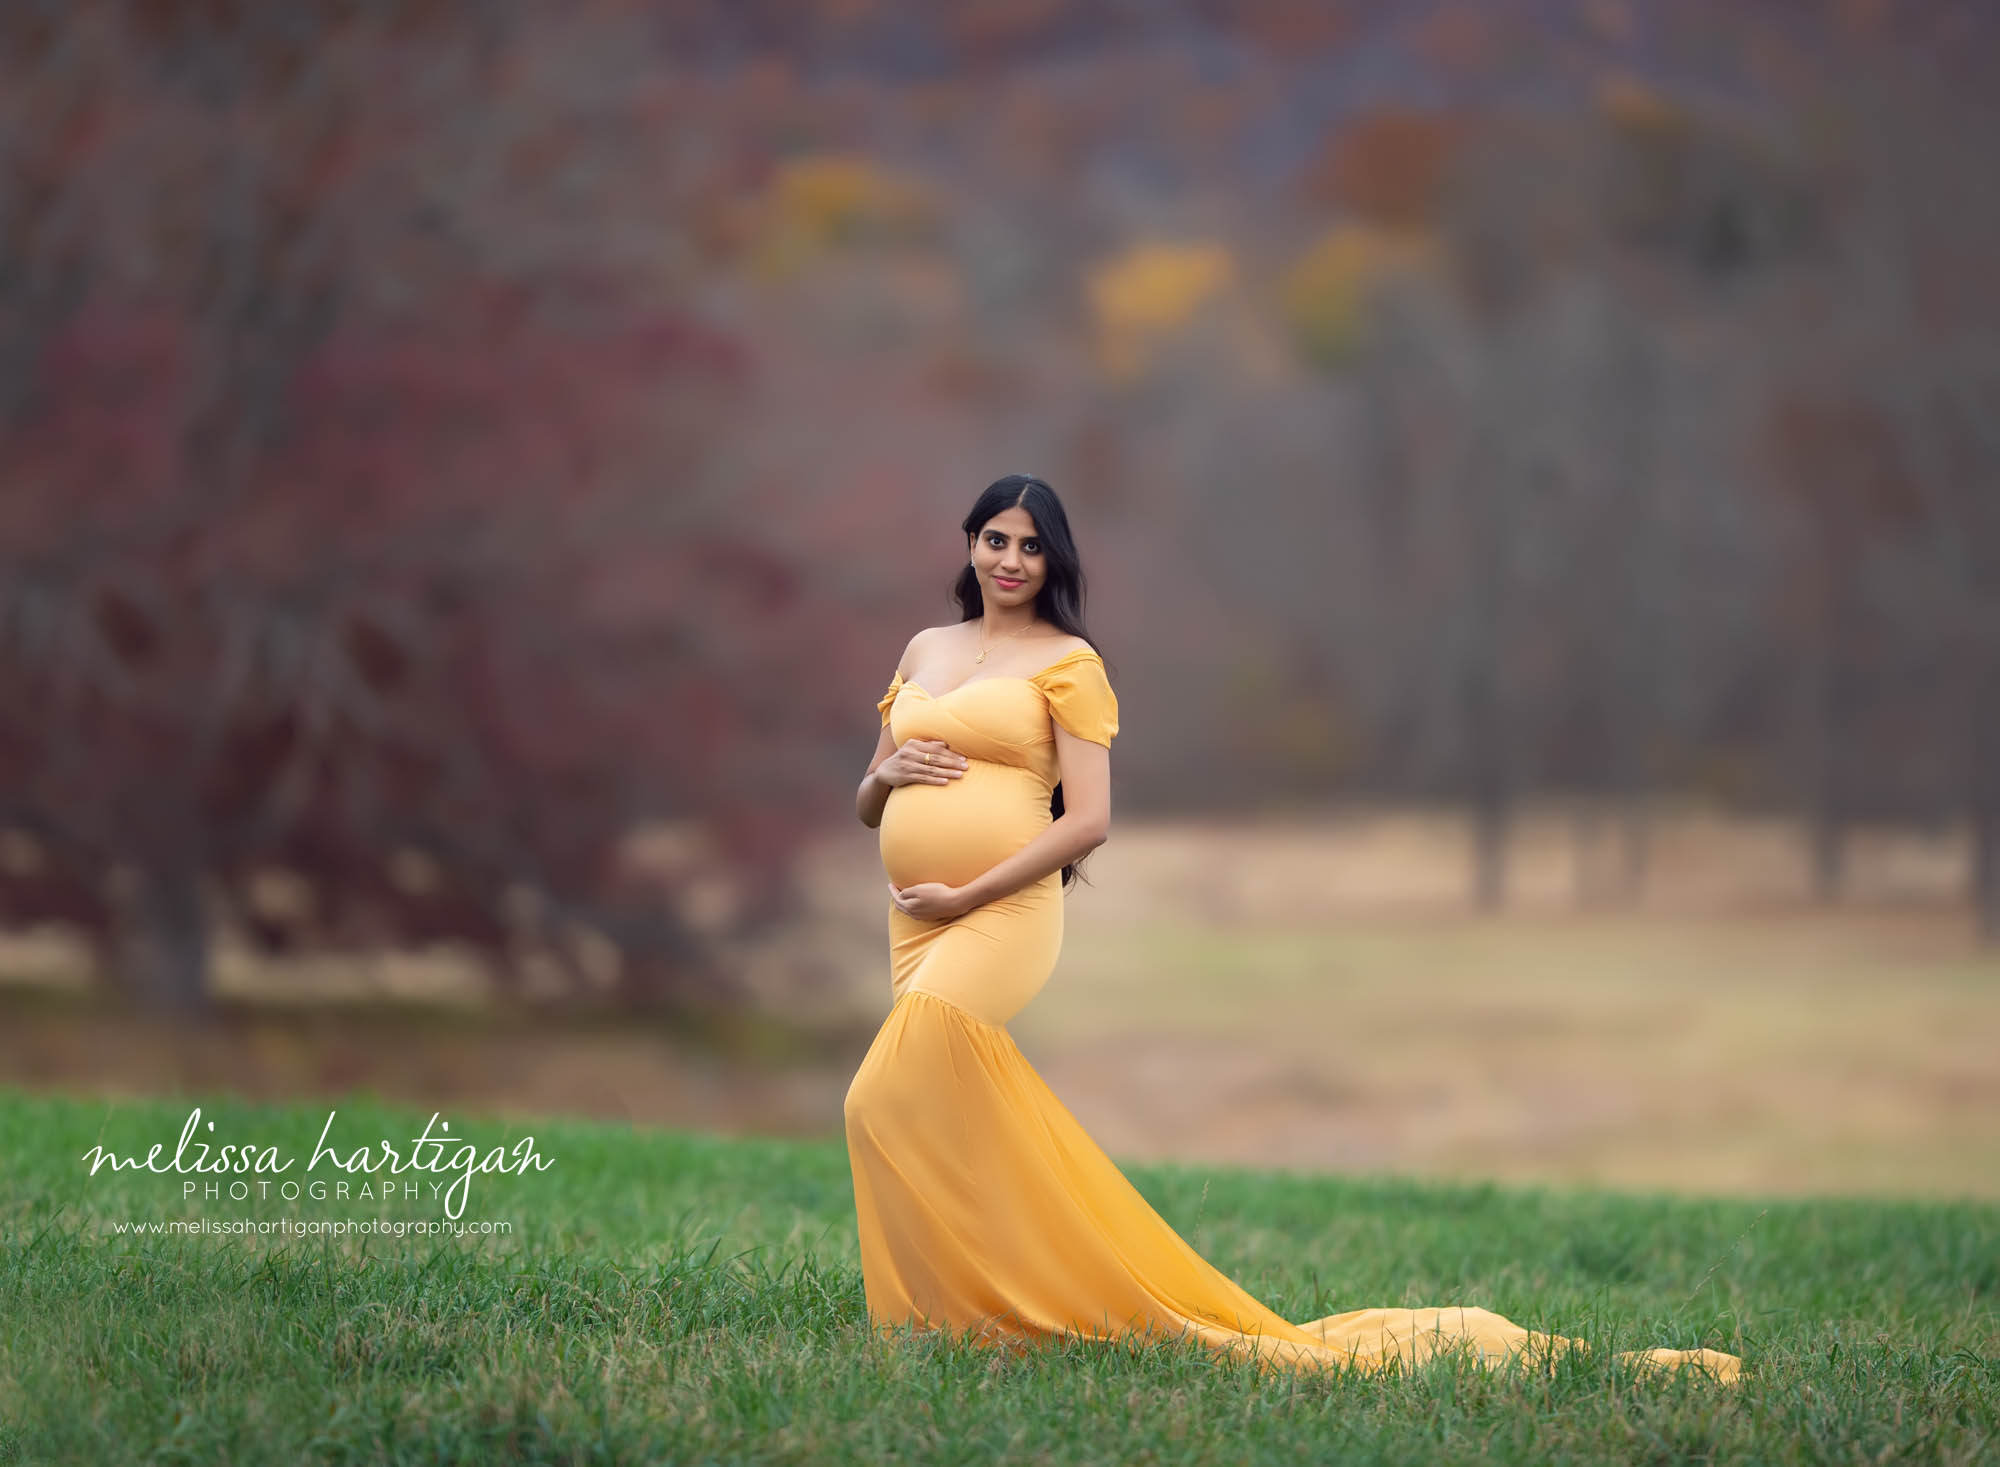 Mom to be standing outside fall maternity picture wearing orange colored long form fitting maternity gown maternity photography ct